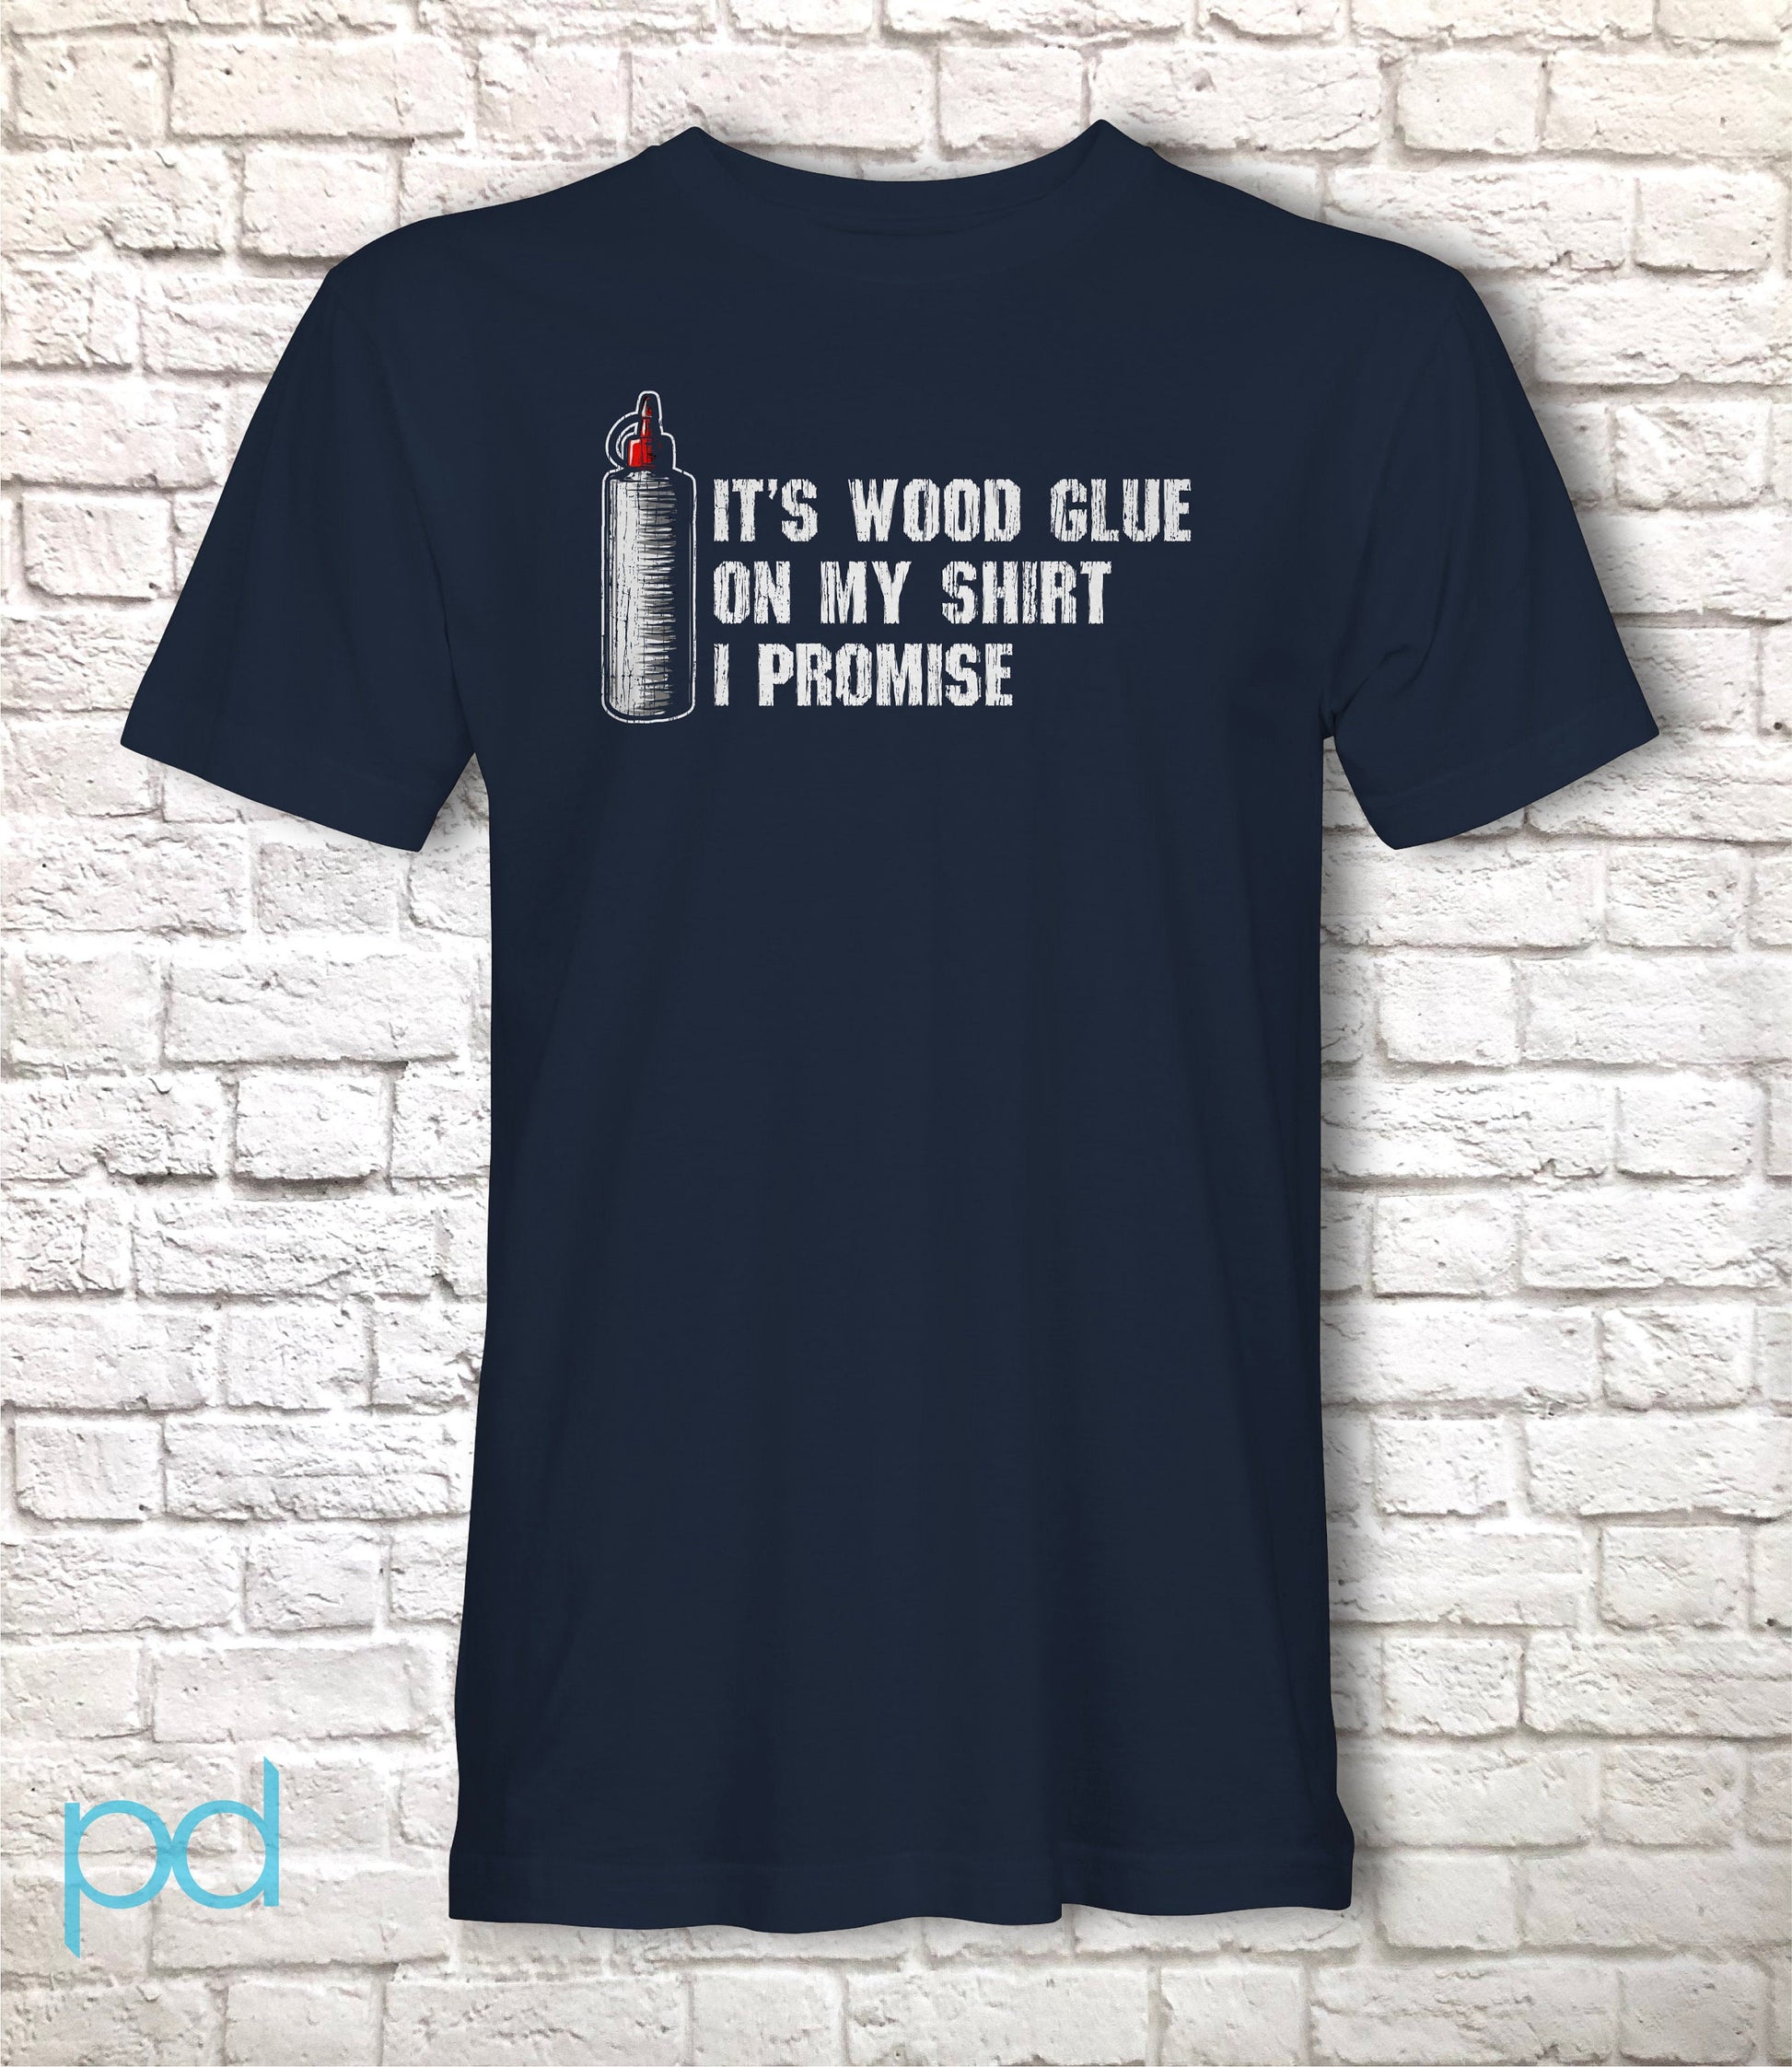 Funny Carpenter T-Shirt, Woodwork Gift Idea, Humorous It&#39;s Wood Glue On My Shirt I Promise Graphic Print Tee Shirt Top